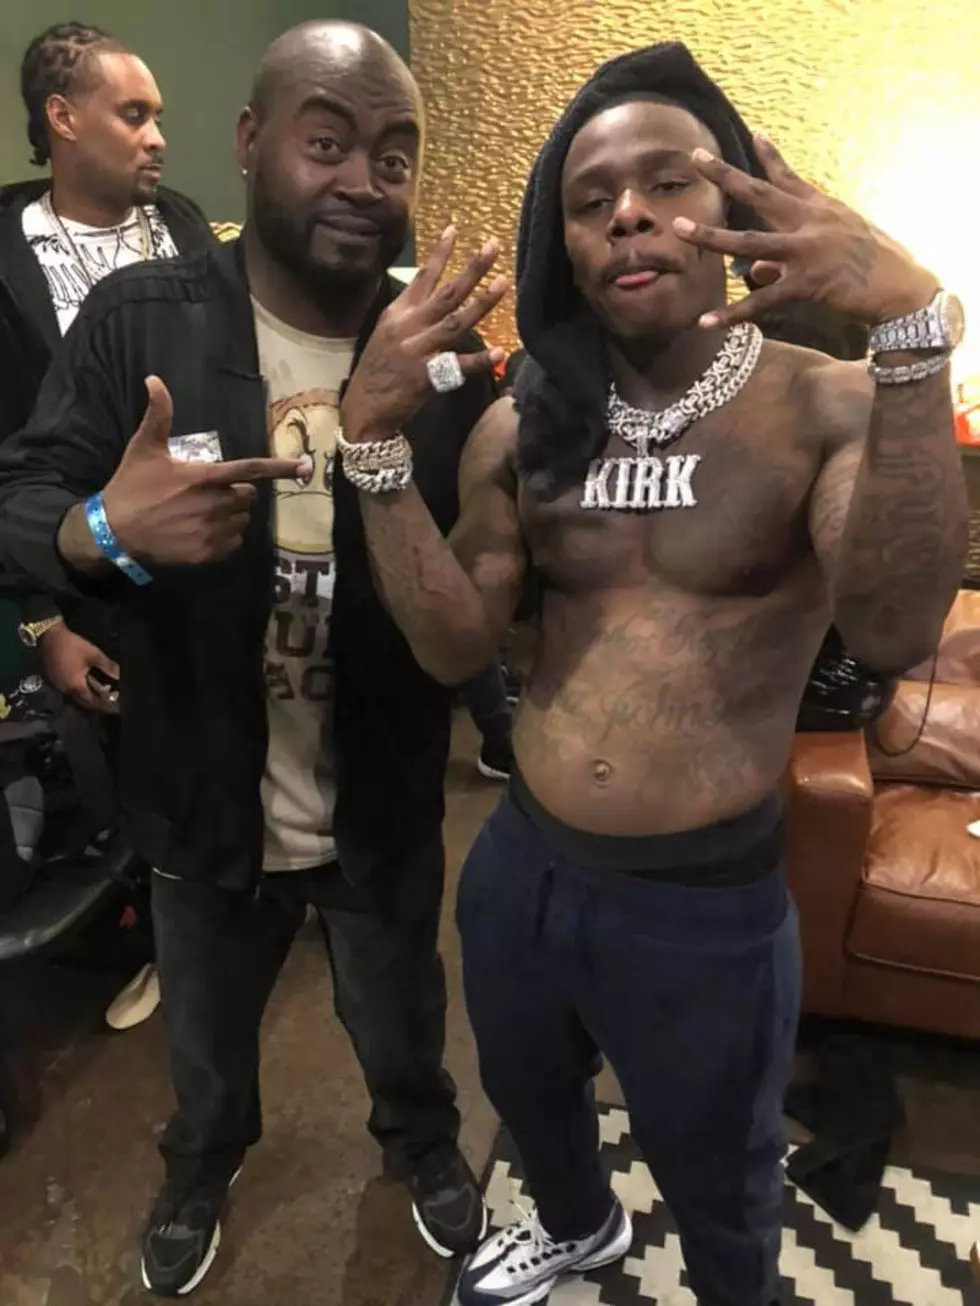 Trey the Choklit Jok caught up with Dababy in Dallas